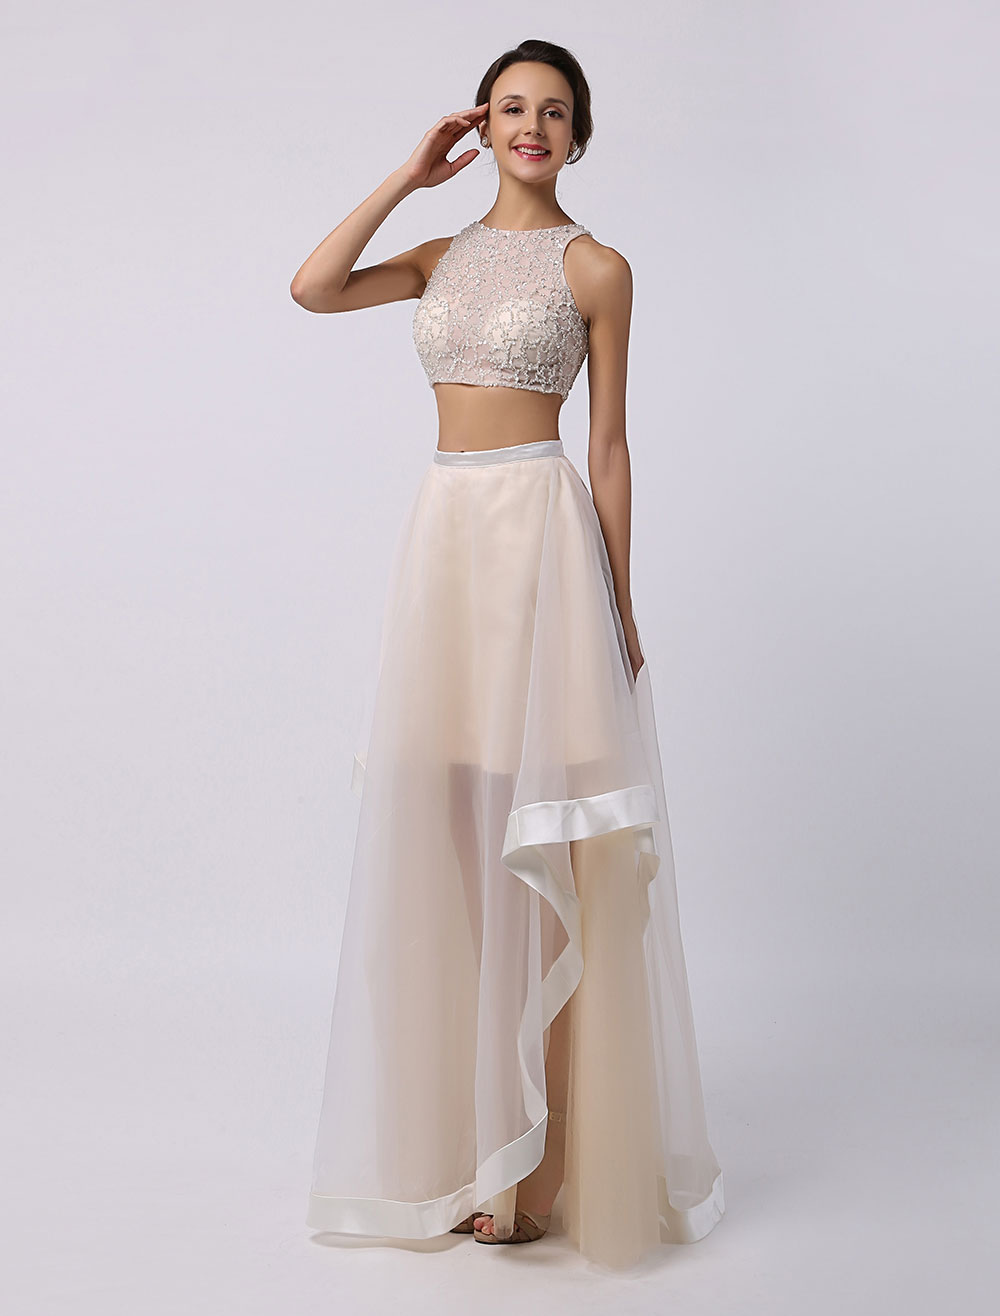 Best Selling Clarisse Prom Dress 3006. Two piece fitted 